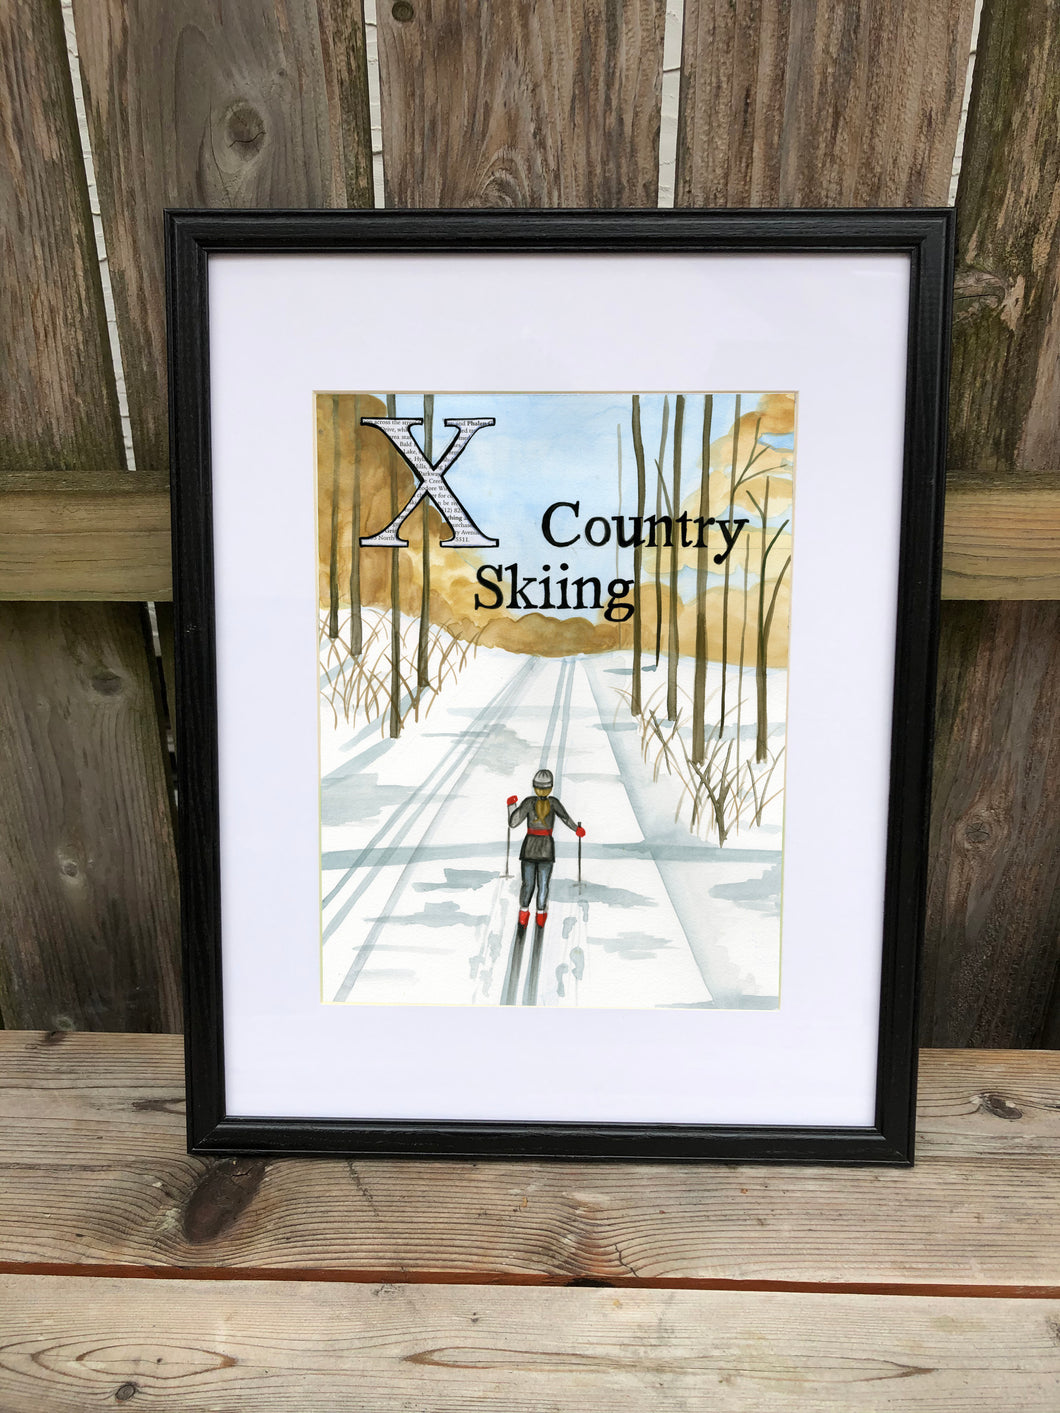 X is for X-Country Skiing - Original Framed Painting